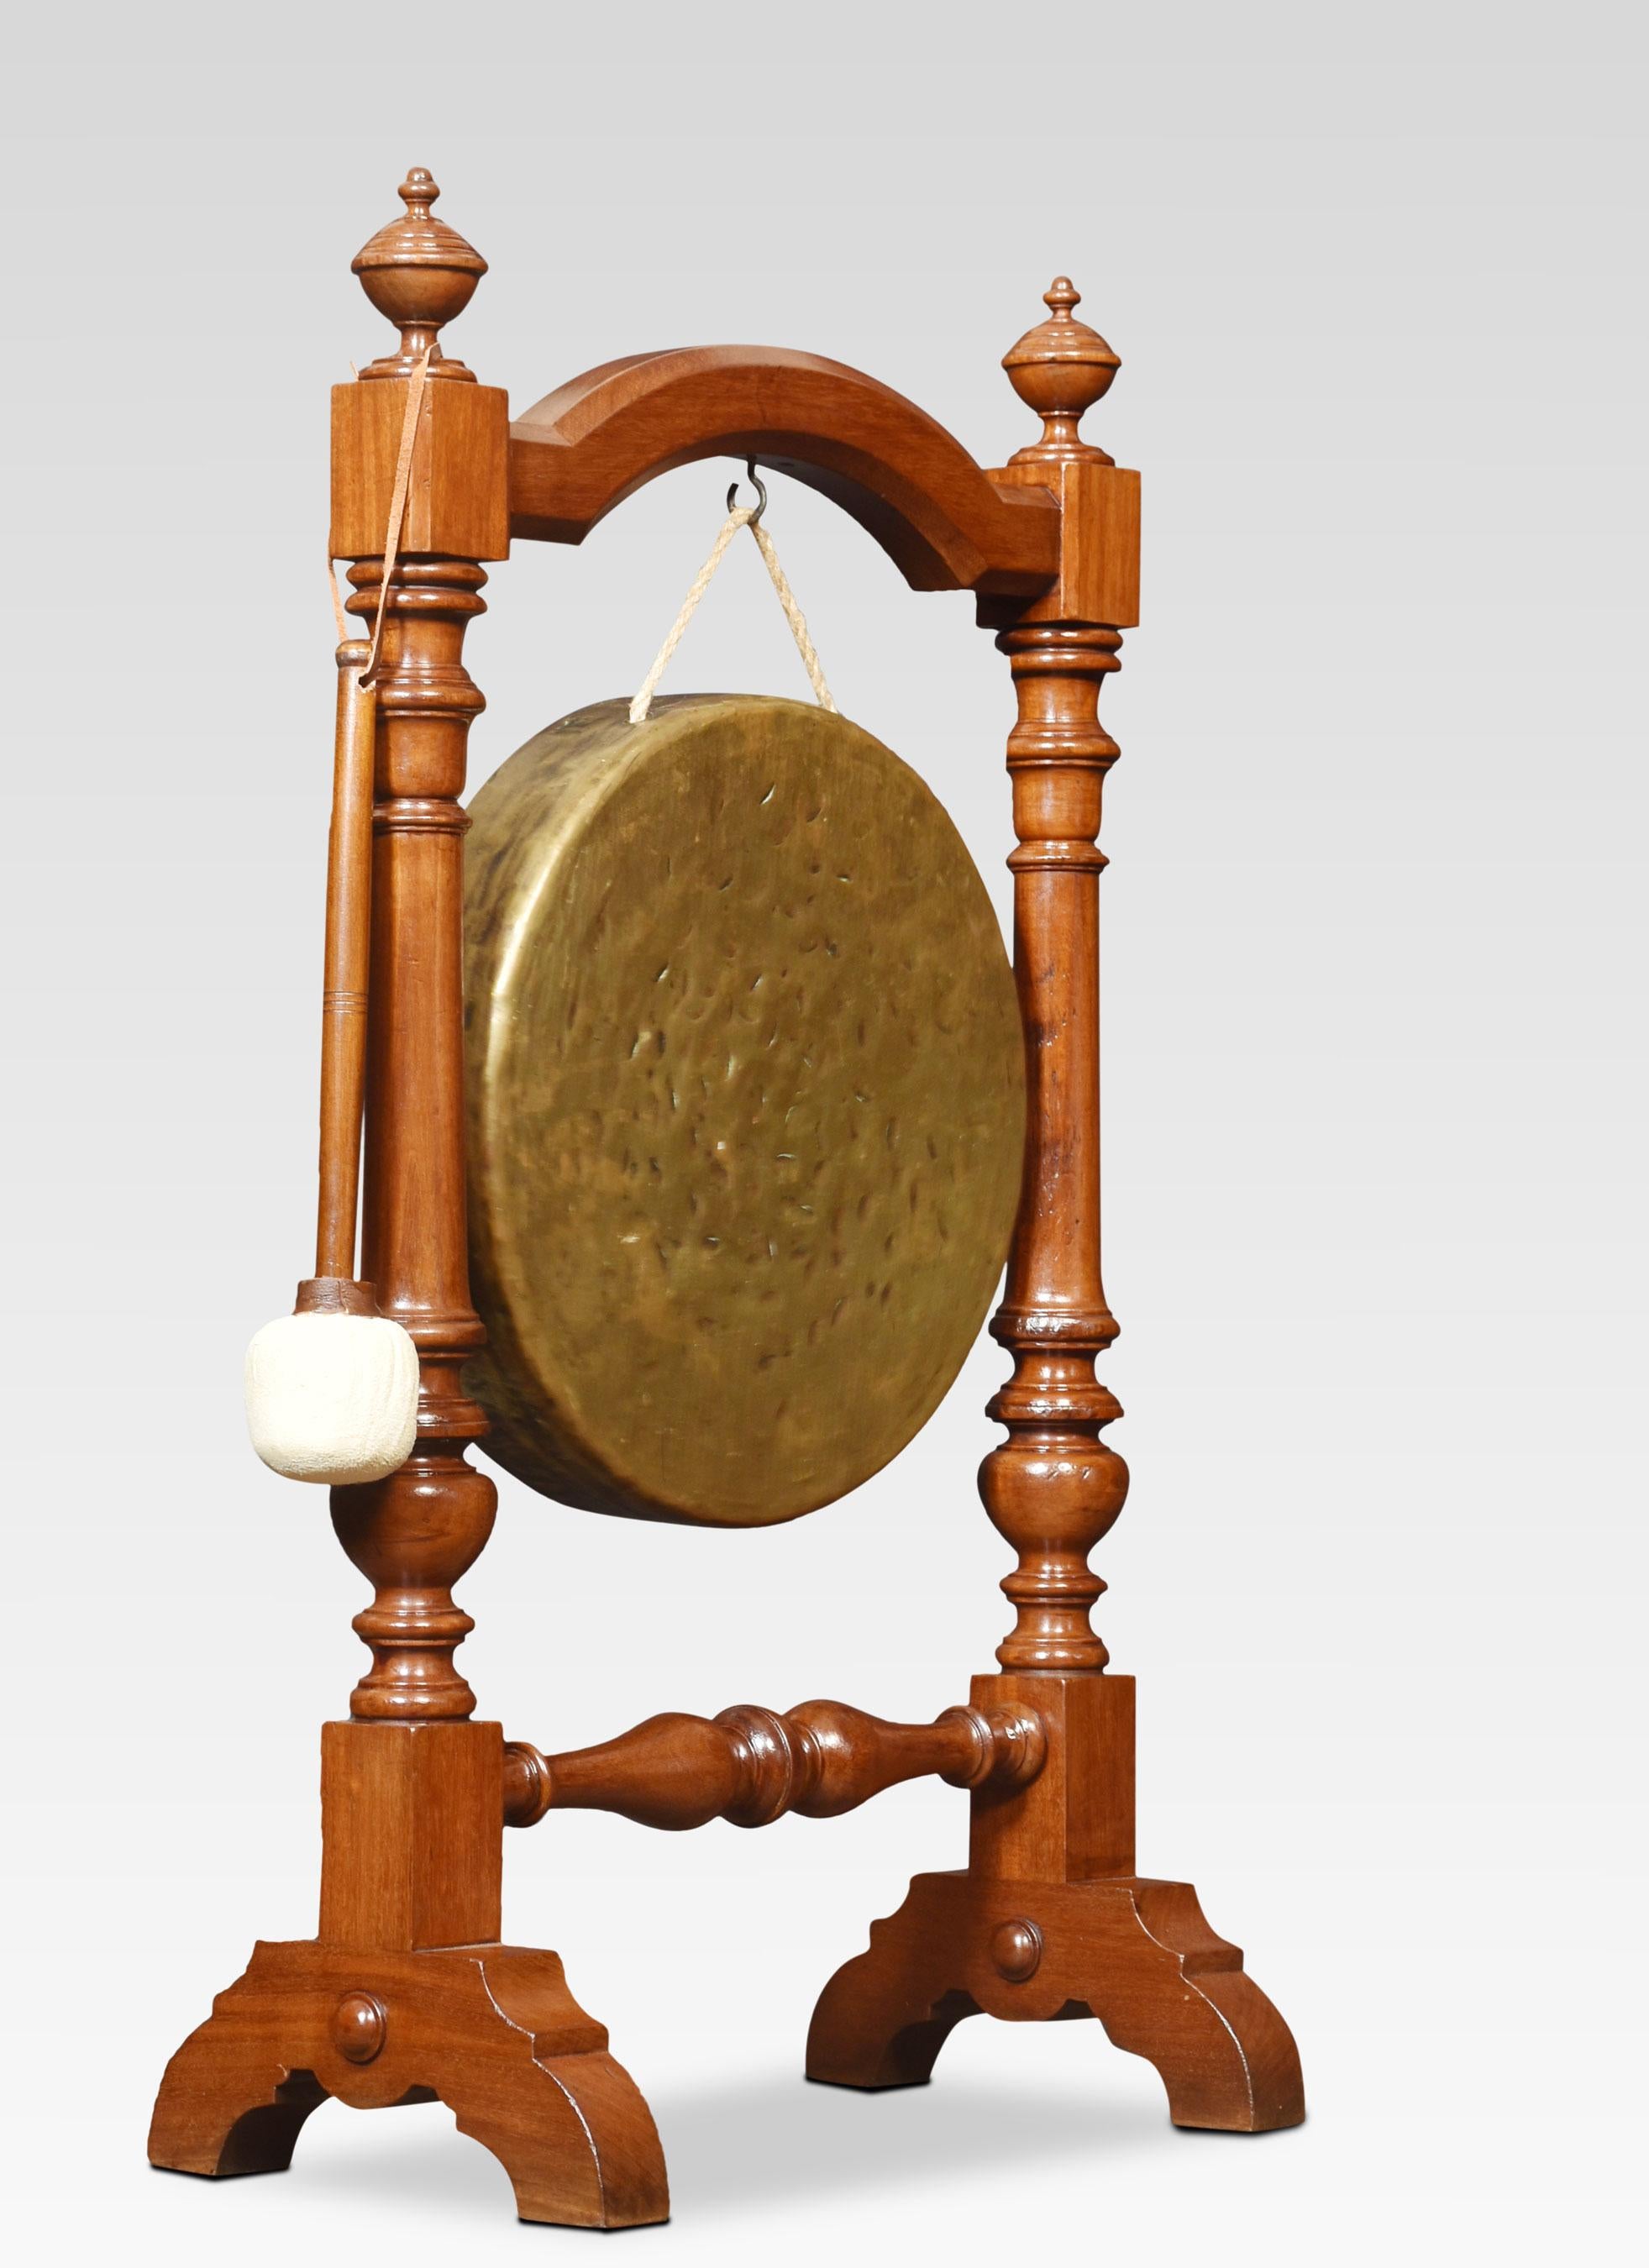 Walnut diner gong having turned finials above the arched frame and turned uprights supporting the original brass gong. All raised up on splayed supports.
Dimensions
Height 32 Inches
Width 19 Inches
Depth 10 Inches